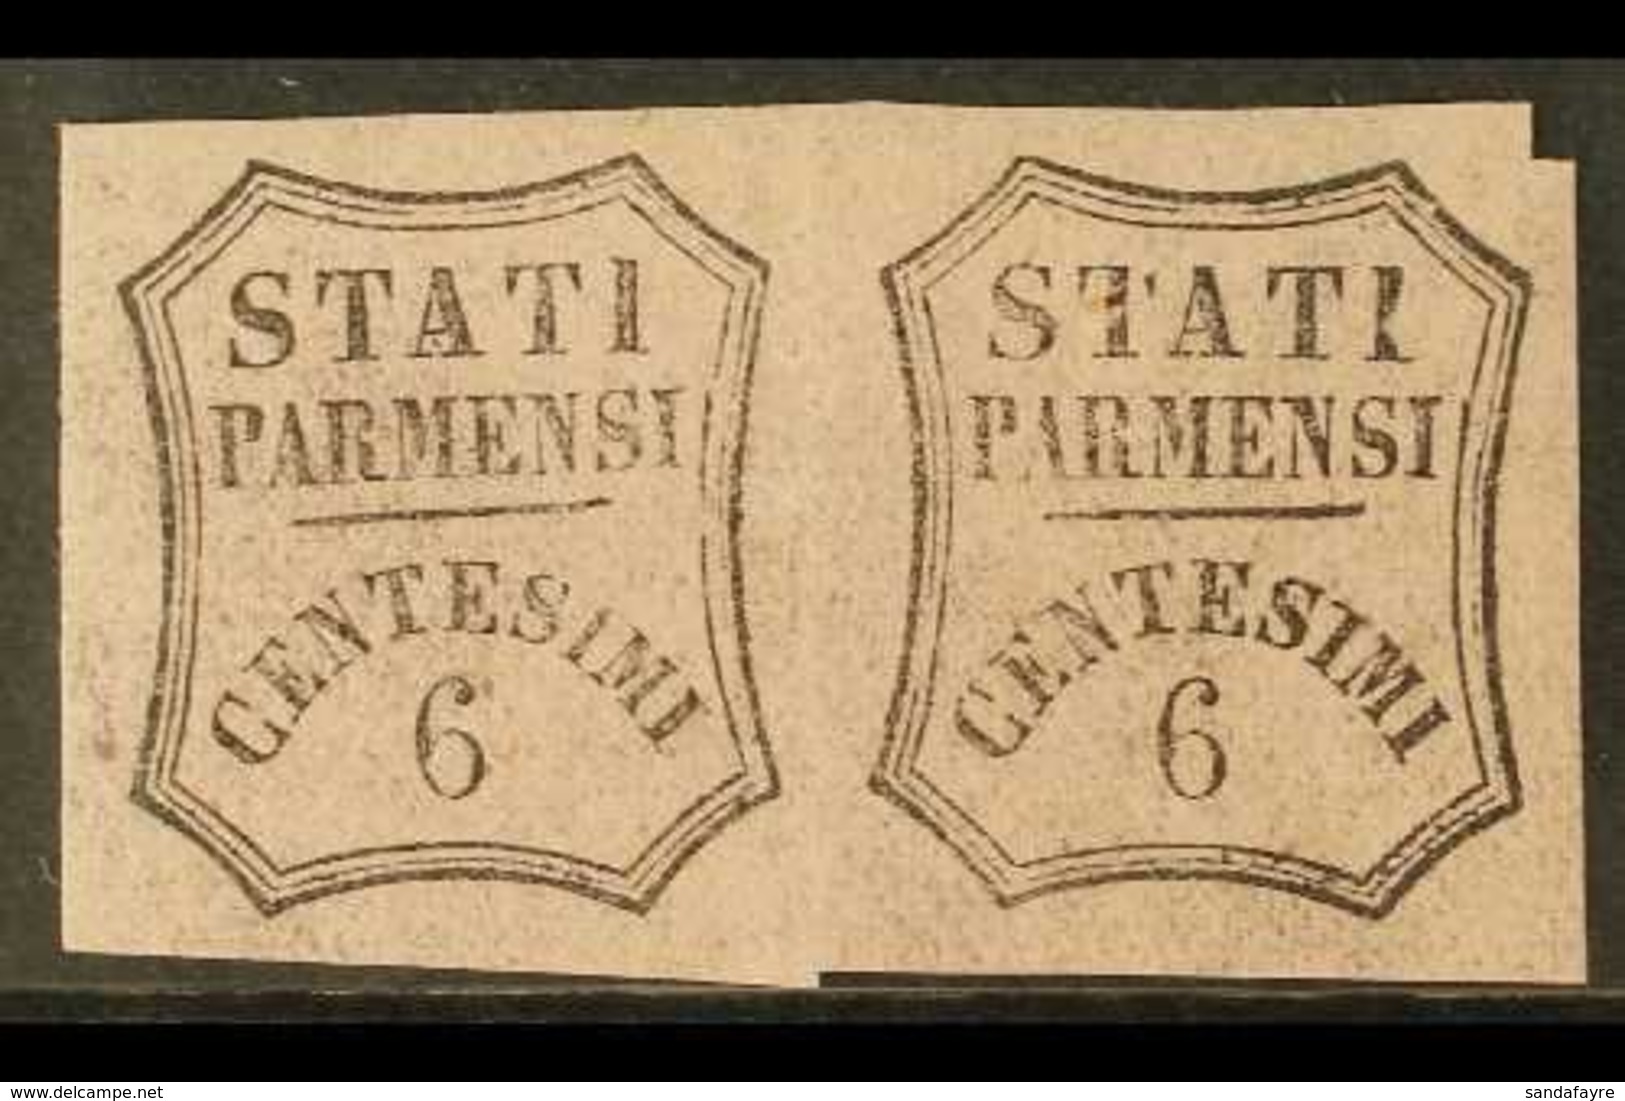 PARMA  NEWSPAPER STAMPS 1857 6c Black On Pale Rose, Unissued, Sass1A, Very Fine Mint Pair. For More Images, Please Visit - Ohne Zuordnung